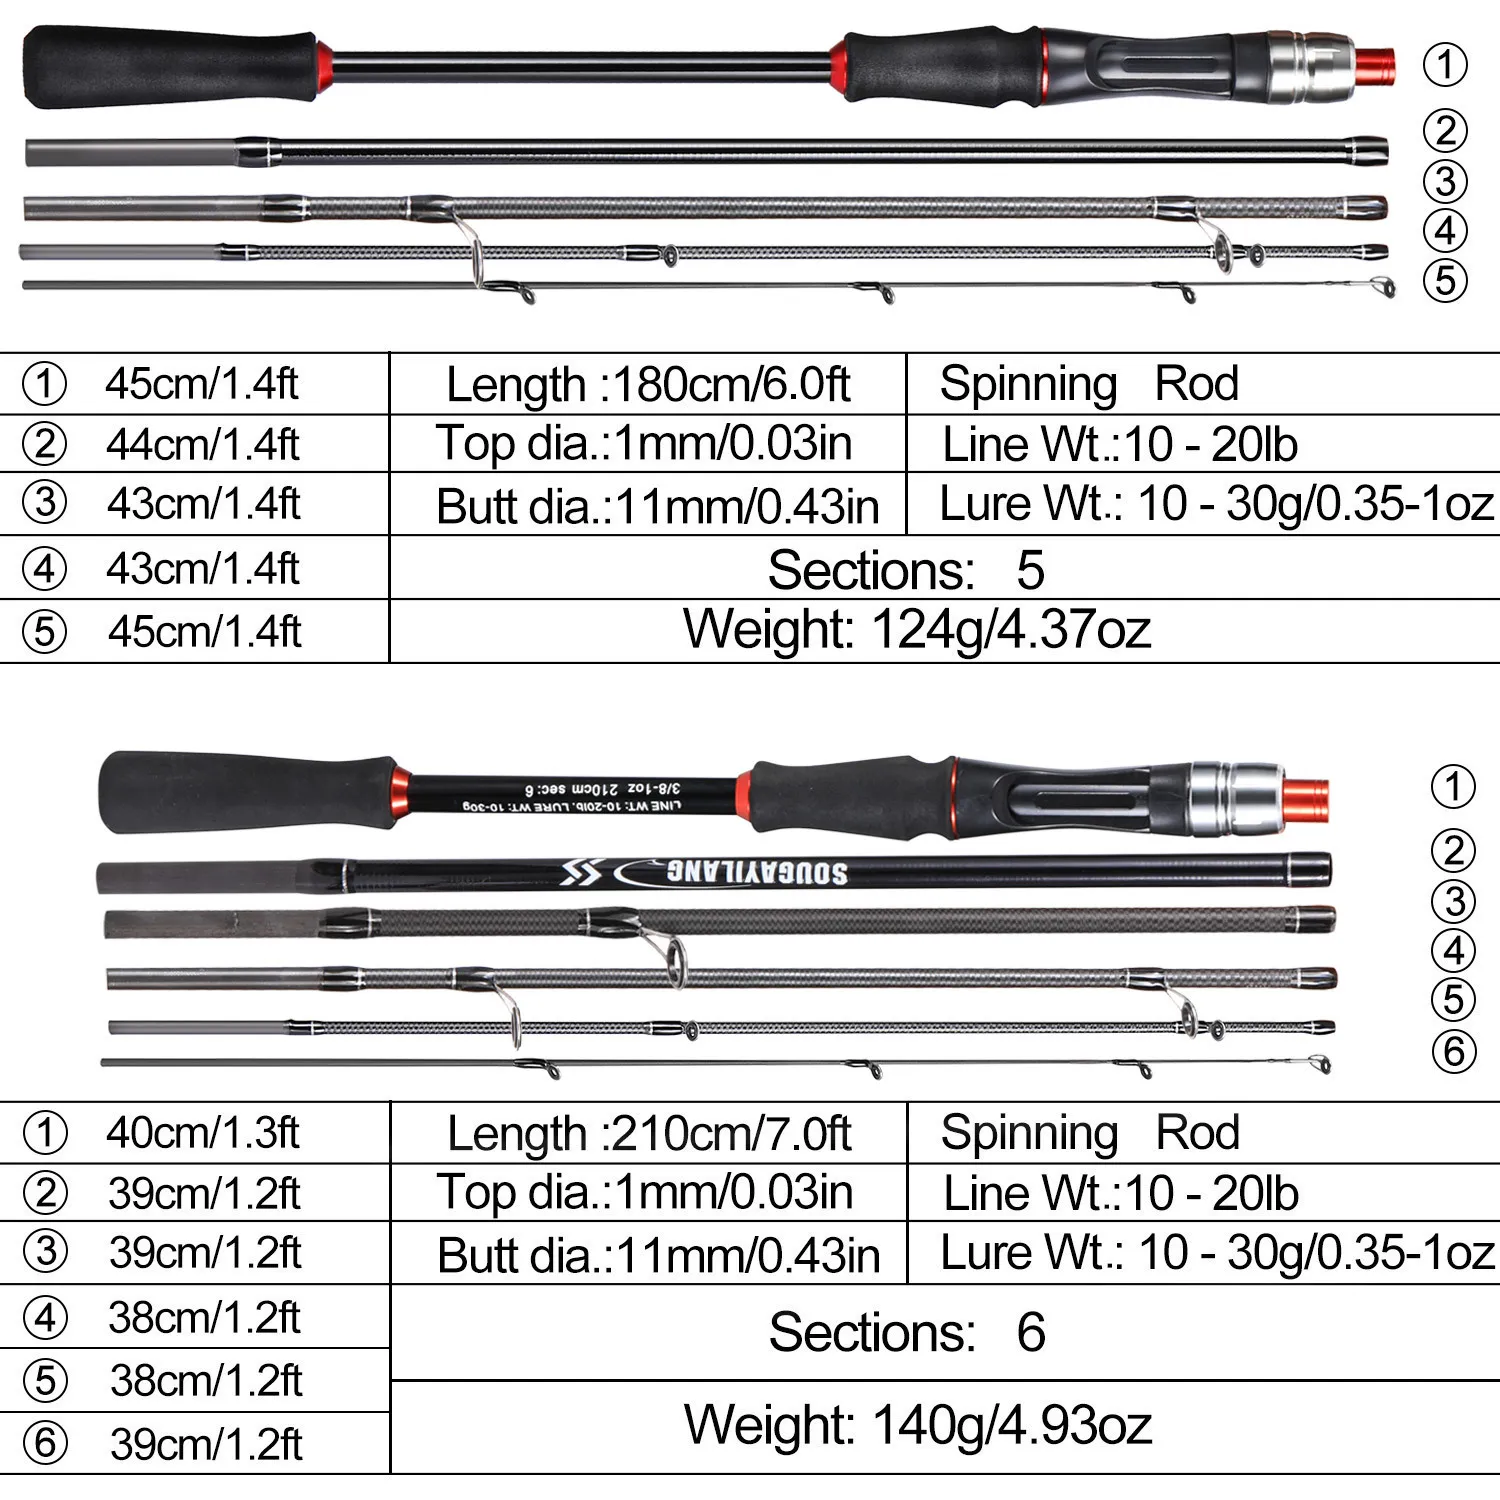 Spinning Rods Sougayilang Fishing Rod 1.8/2..1m Spinning/Casting Rod Power  M Carbon Rod Pole 5/6 Sections Travel Fishing Pole Fishing Tackle 230627  From Lian09, $16.46